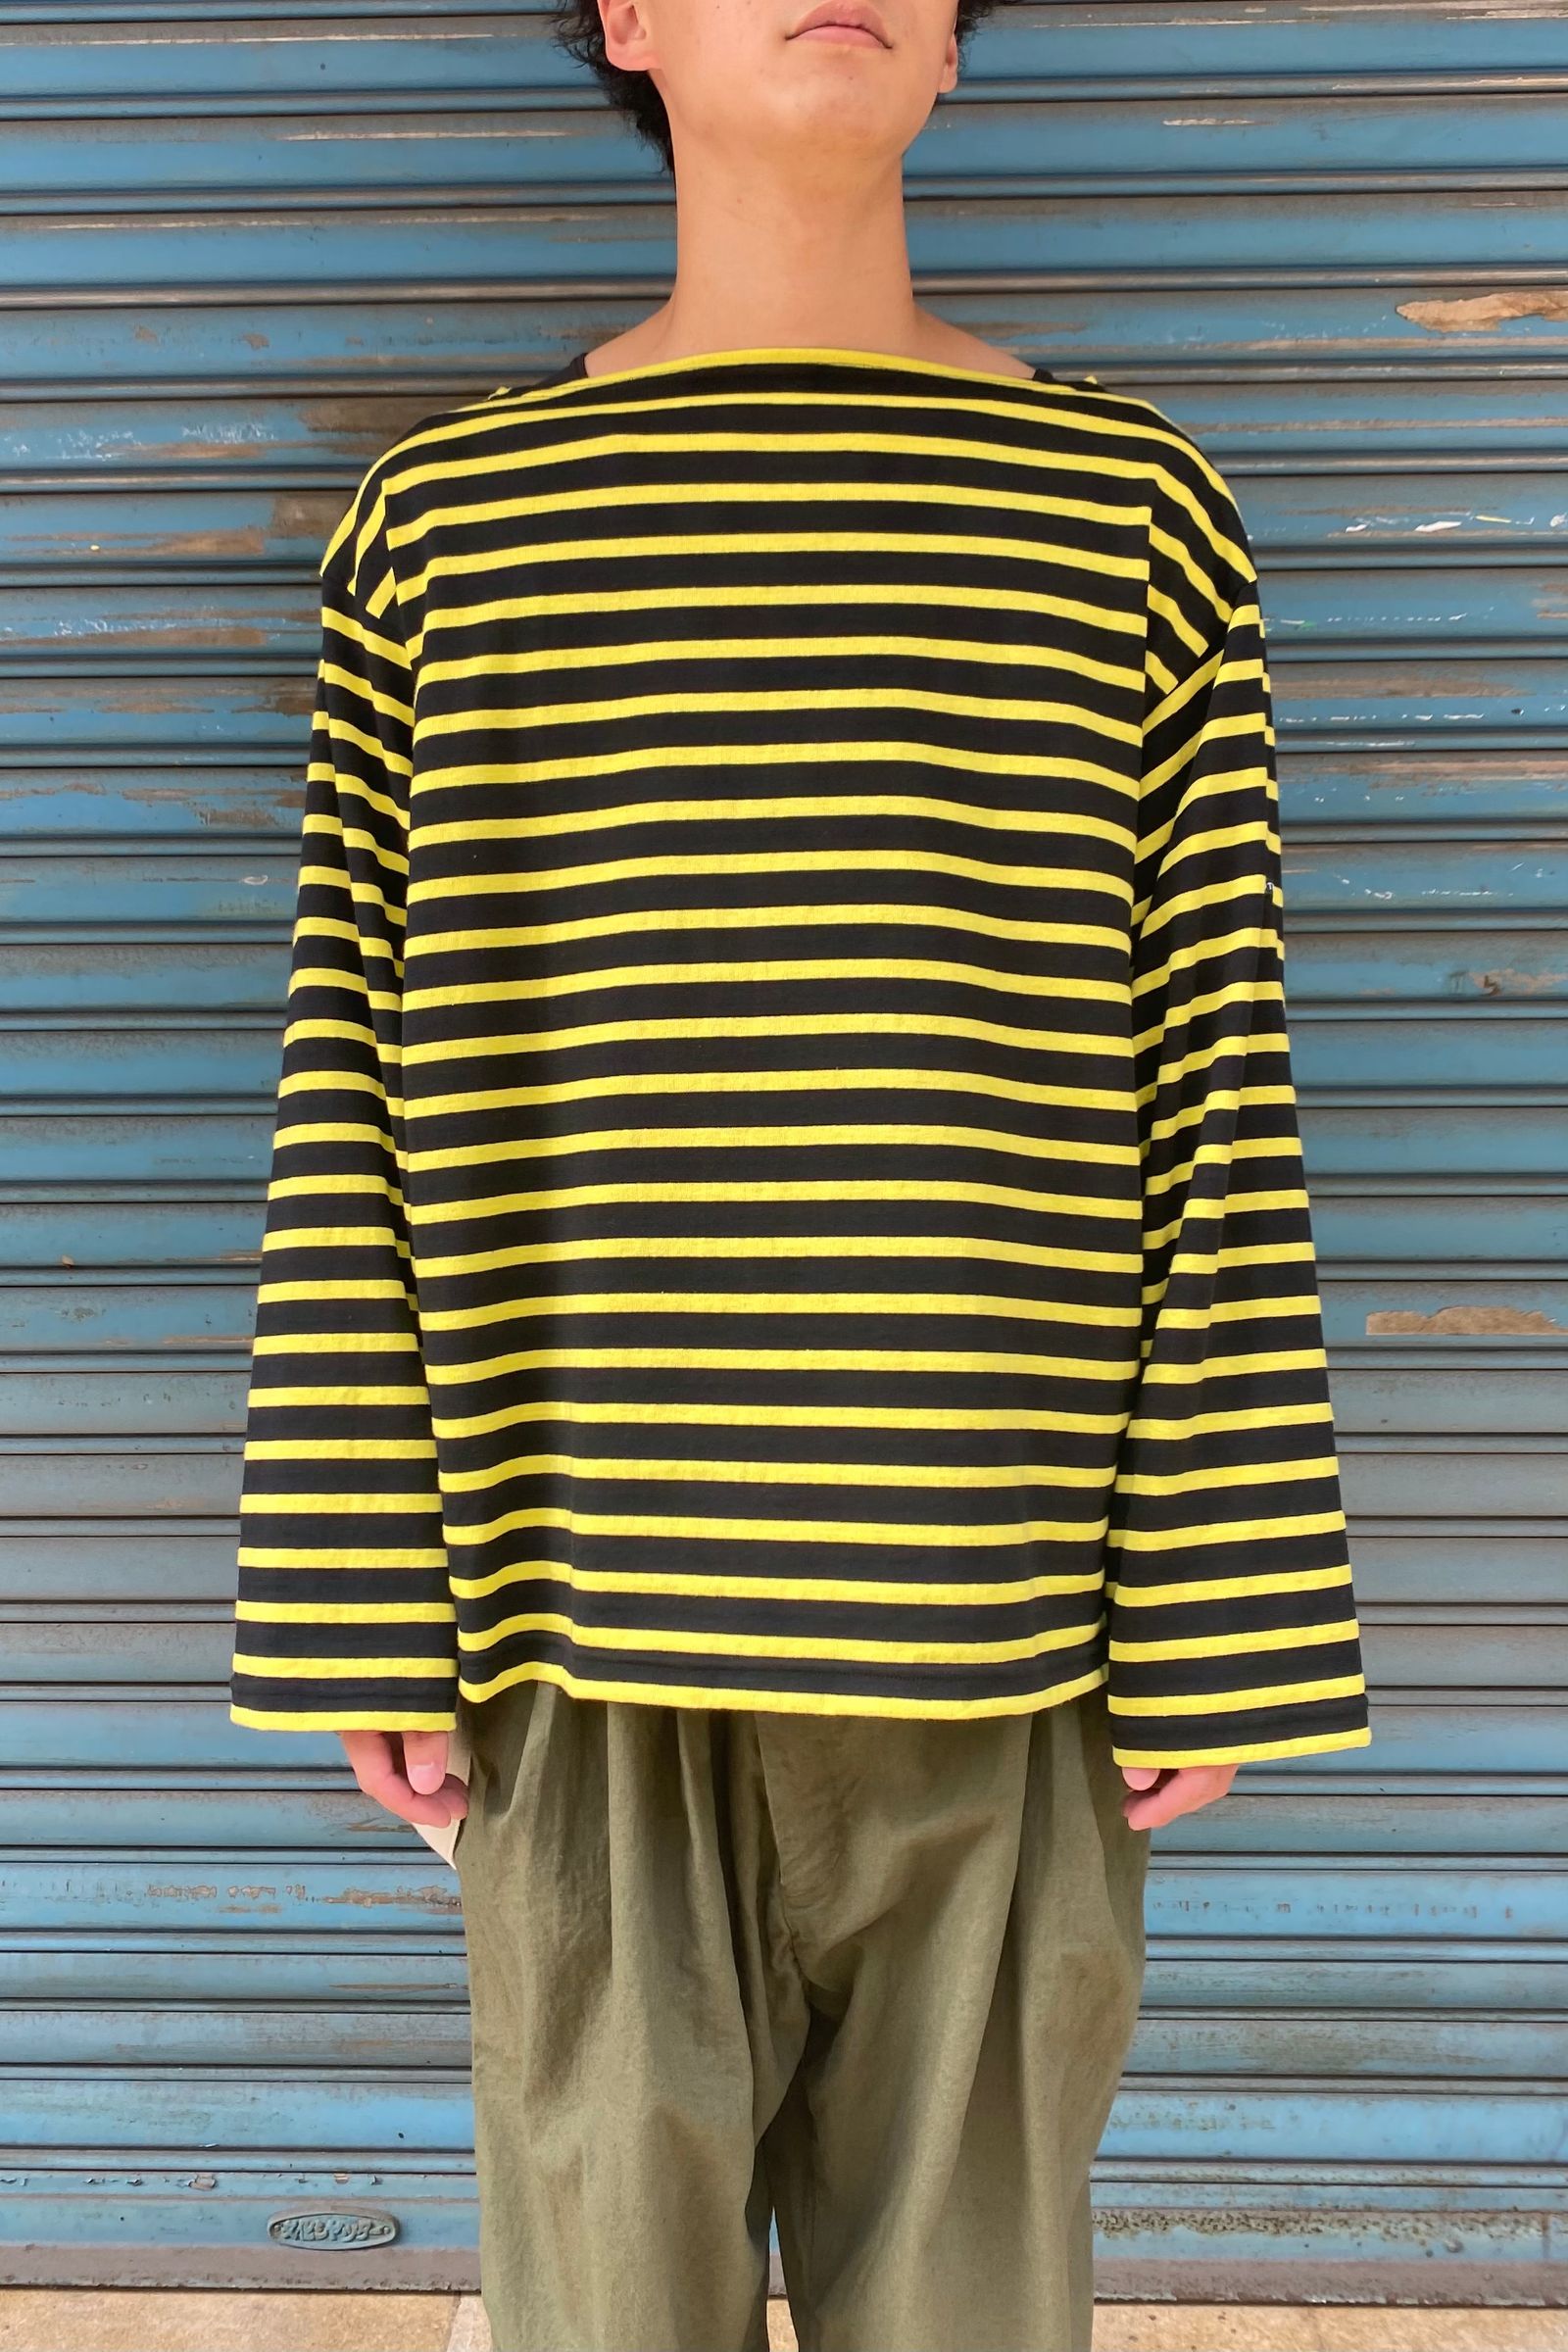 OUTIL - tricot aast -black×yellow- 21ss unisex | asterisk